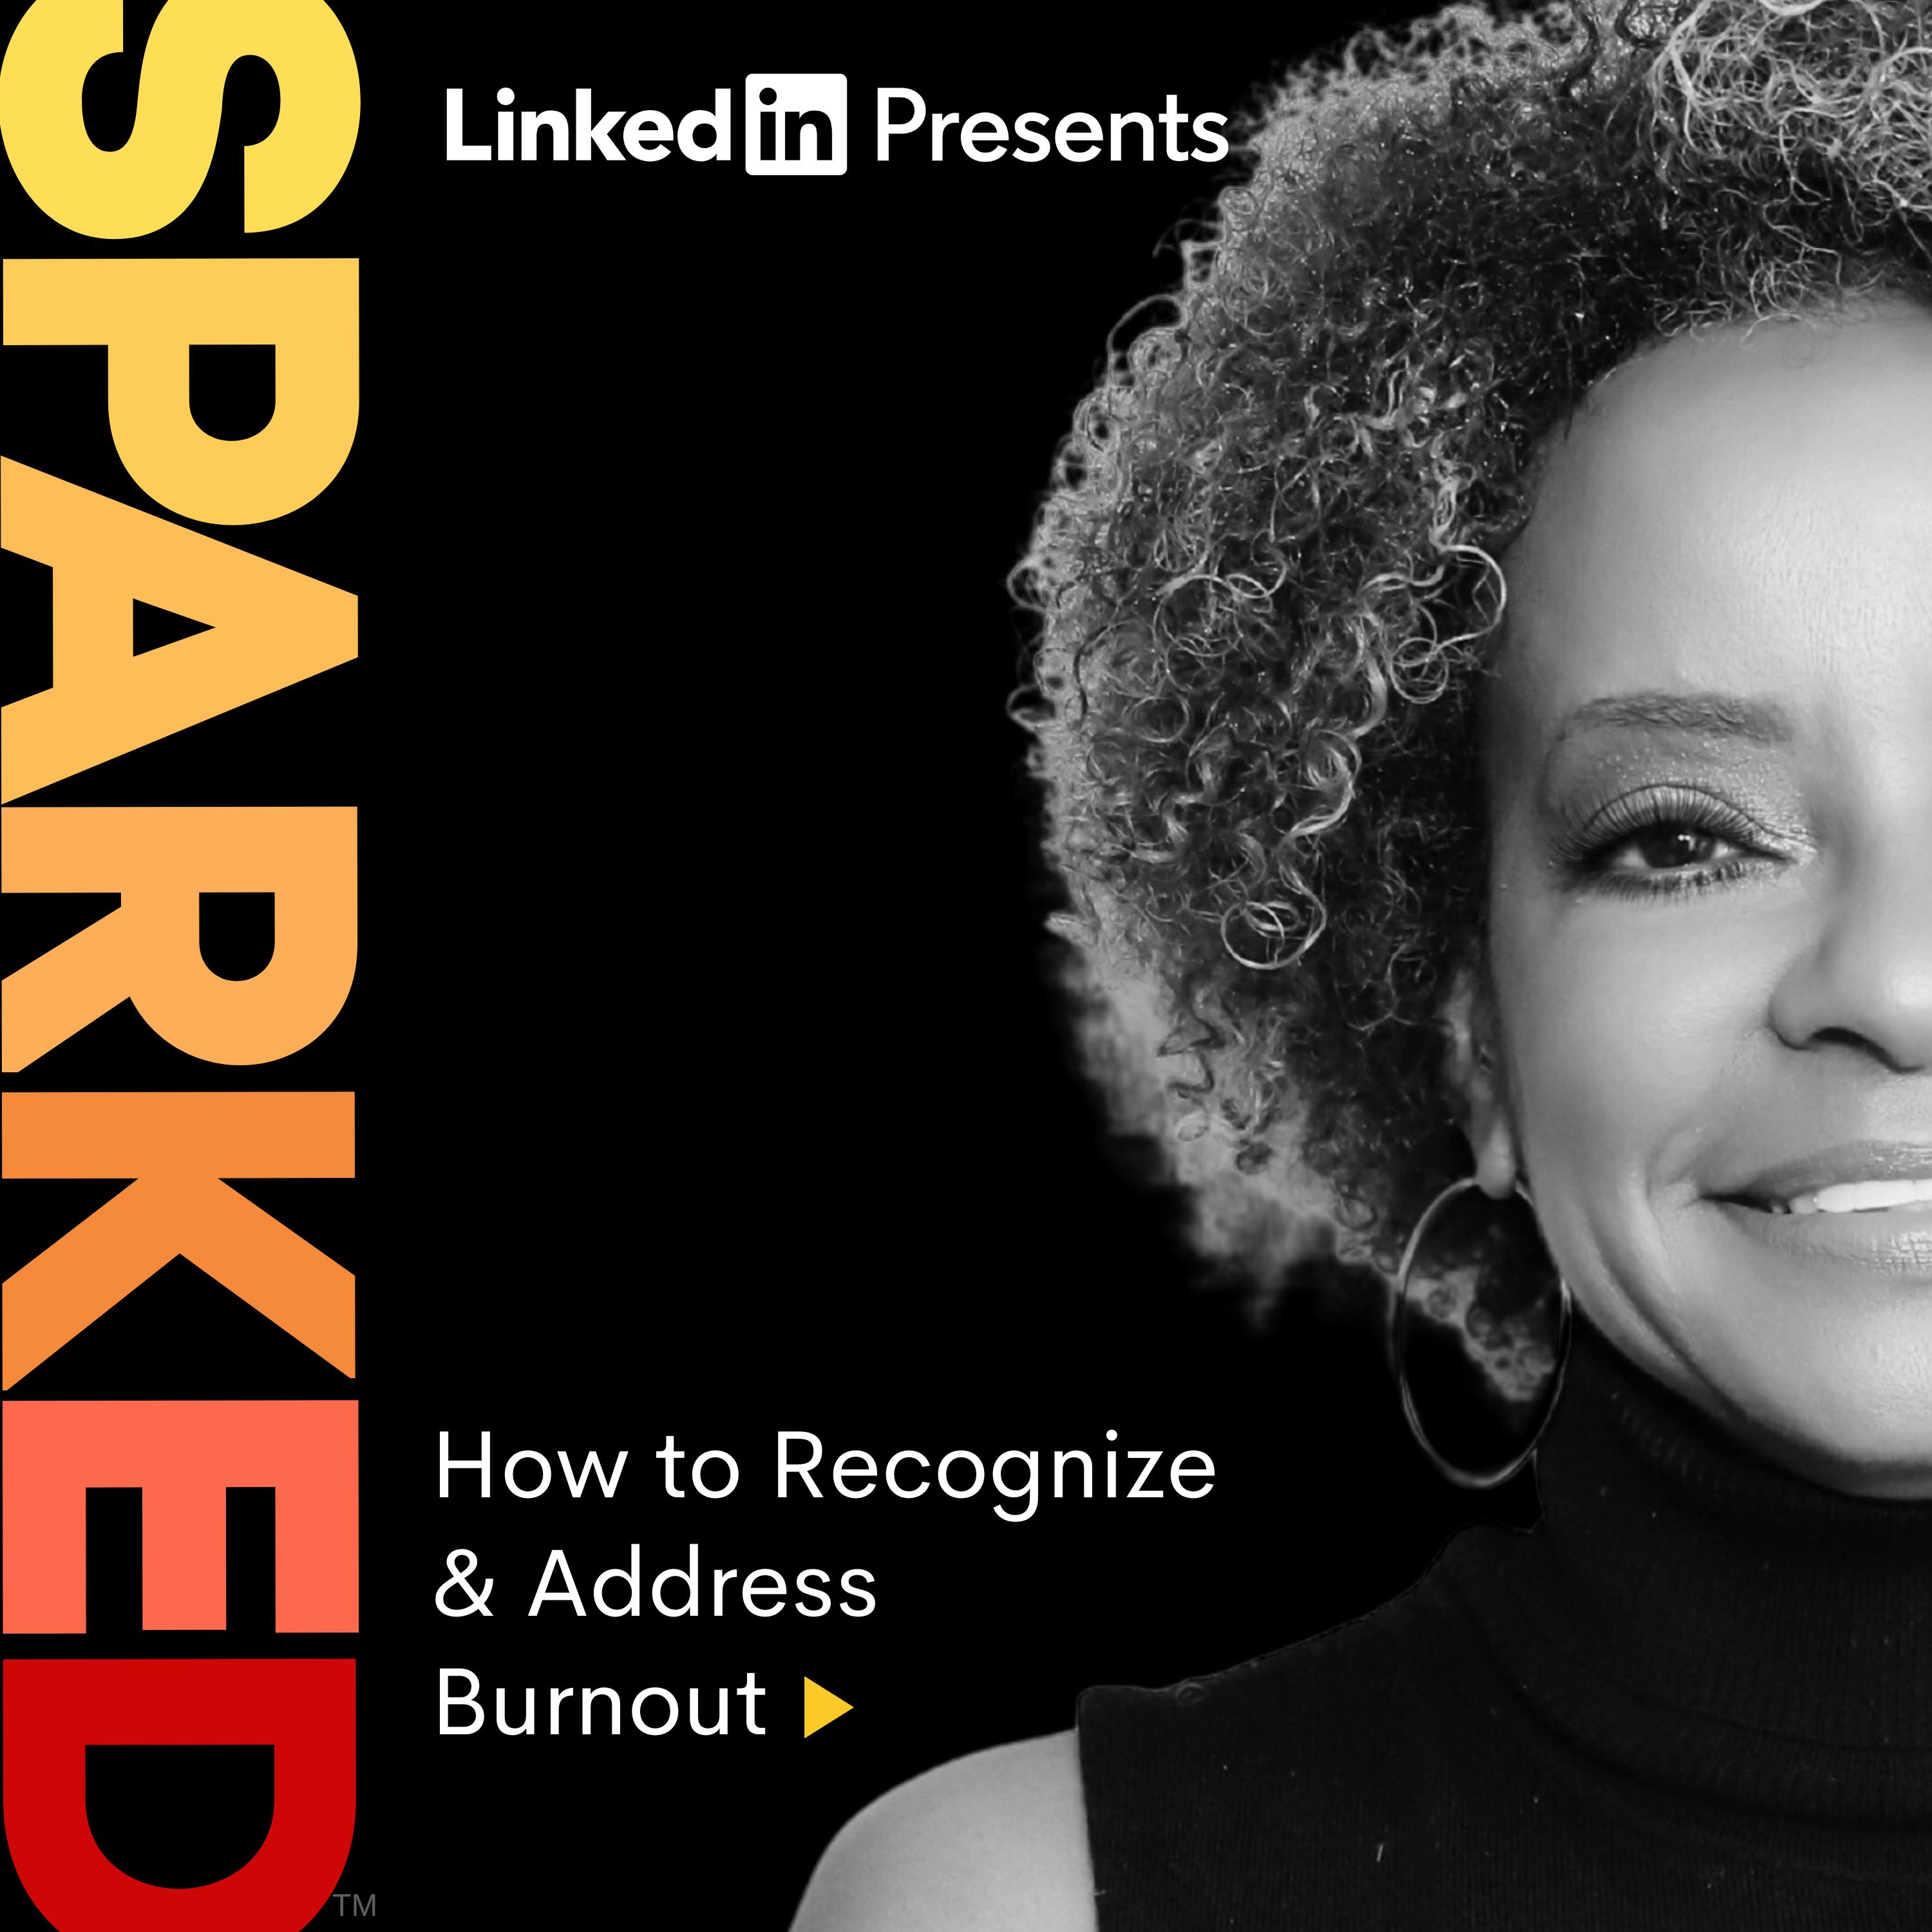 How to Recognize & Address Burnout